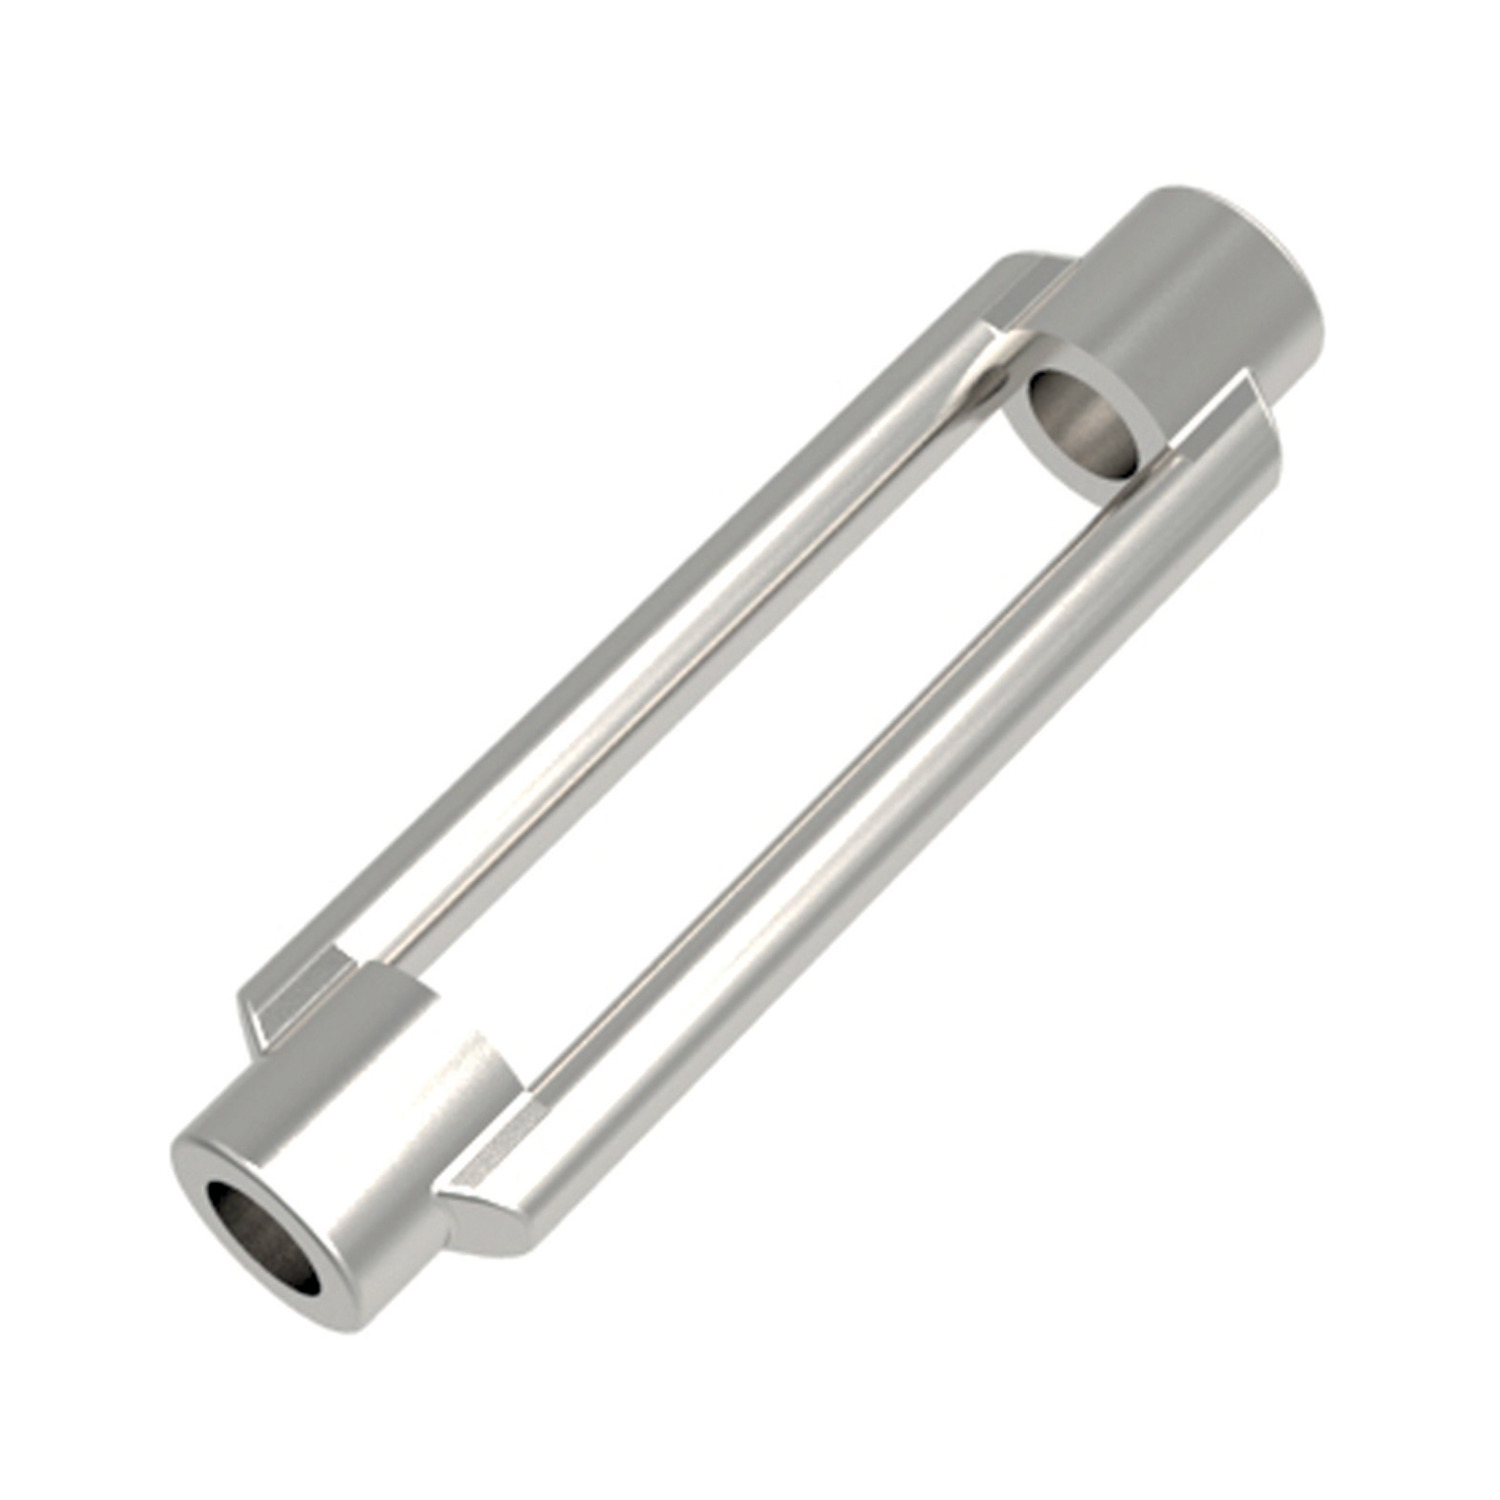 R3832.060-090-A4 Turnbuckles Body M6x90 A4 s/s Not to be used for lifting unless SWL marked.